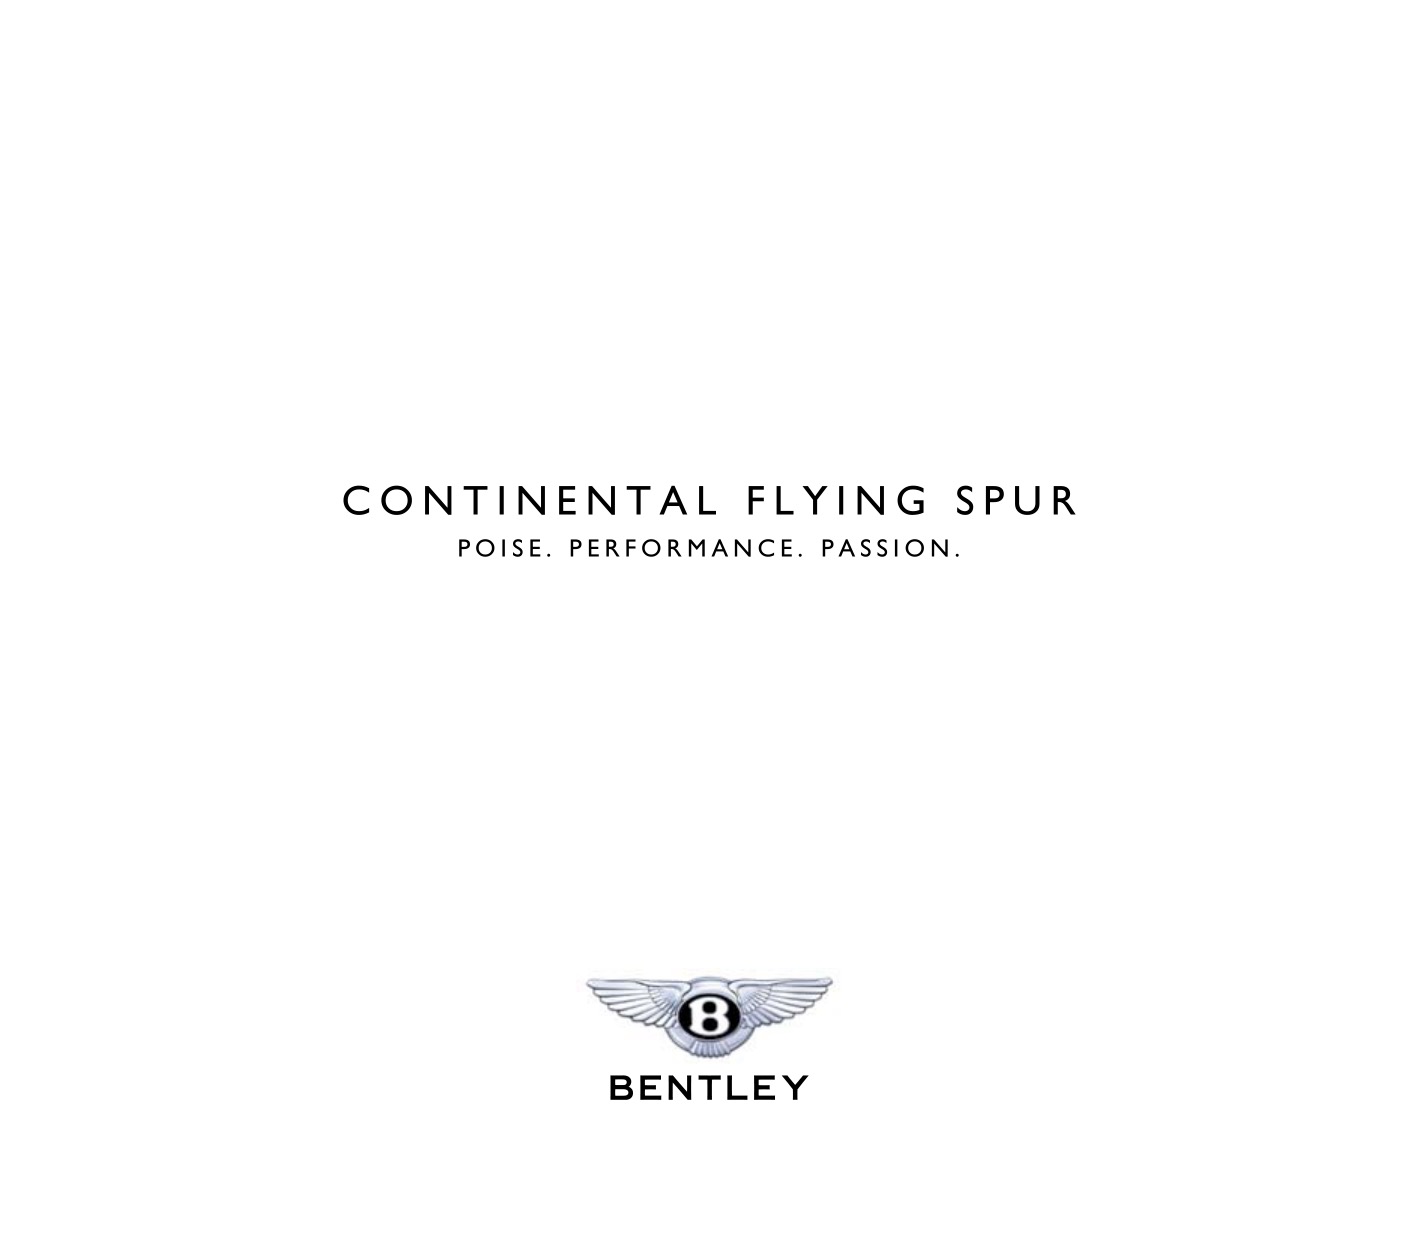 2007 Bentley Continental Flying Spur Brochure Page 17